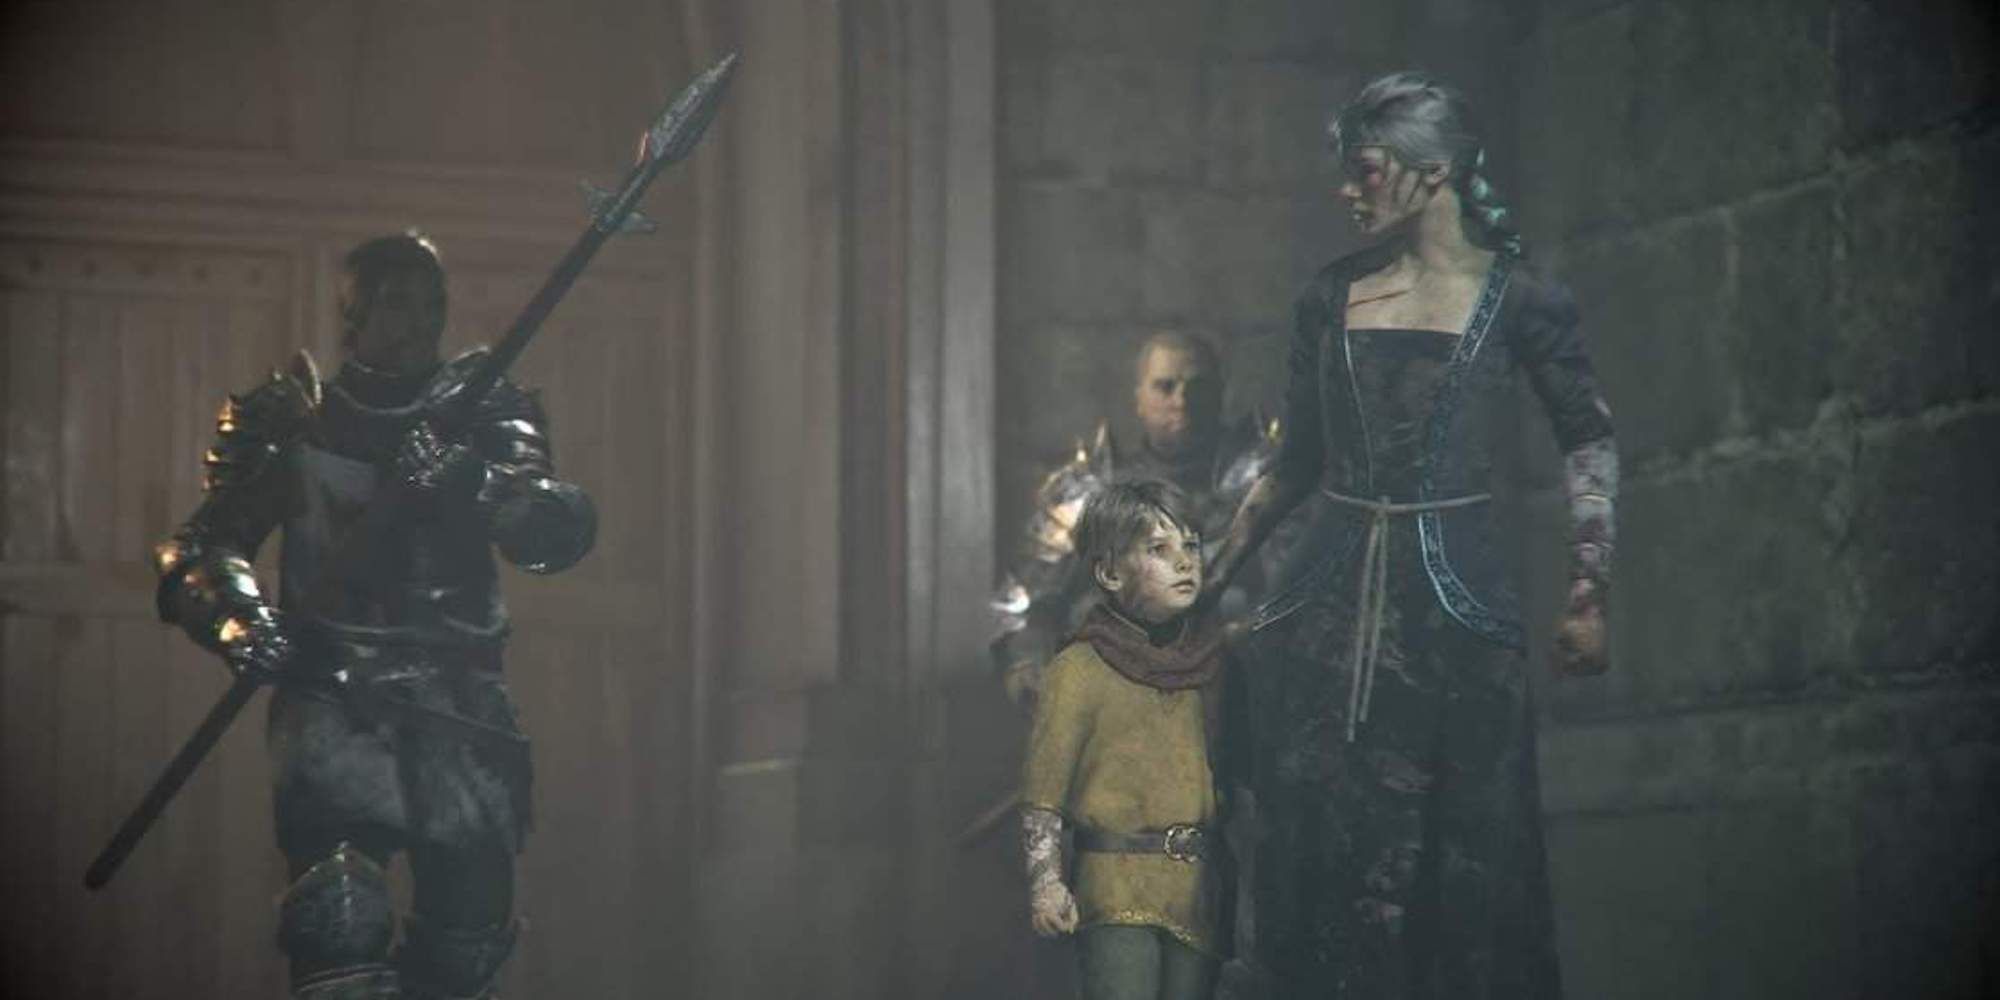 Hugo and his mother plague tale